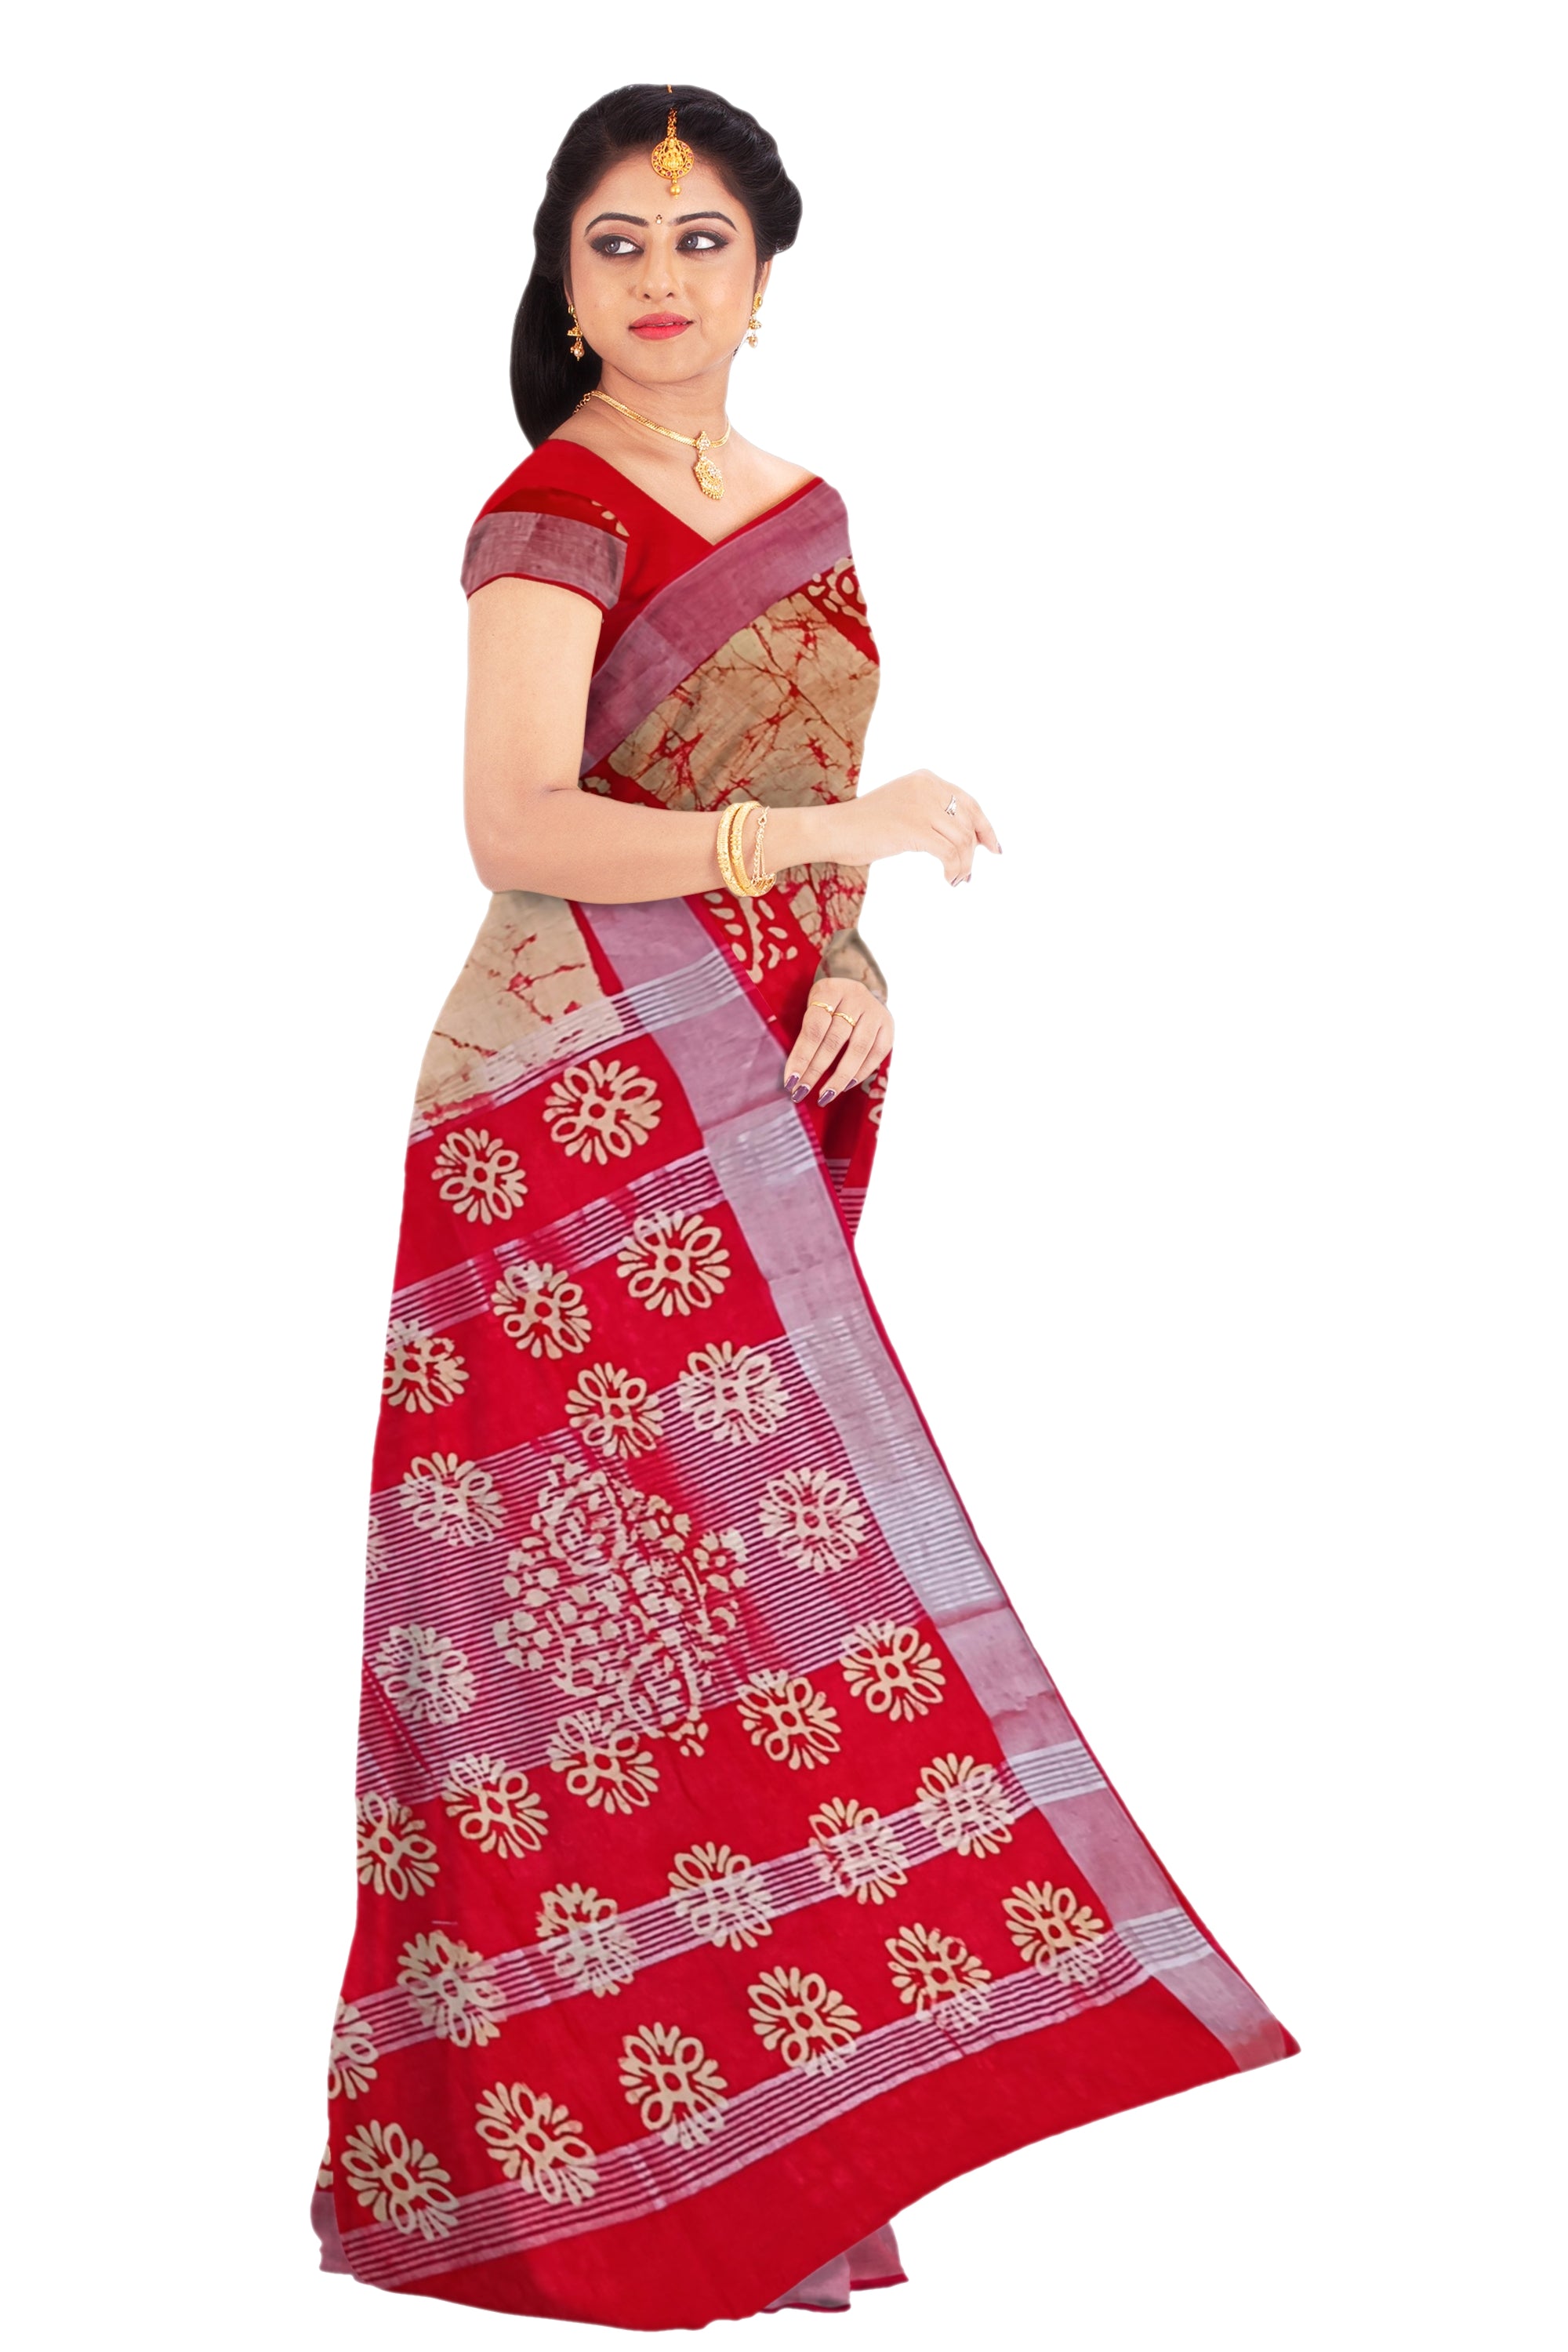 Sandalwood Linen Saree With Red Printed Design